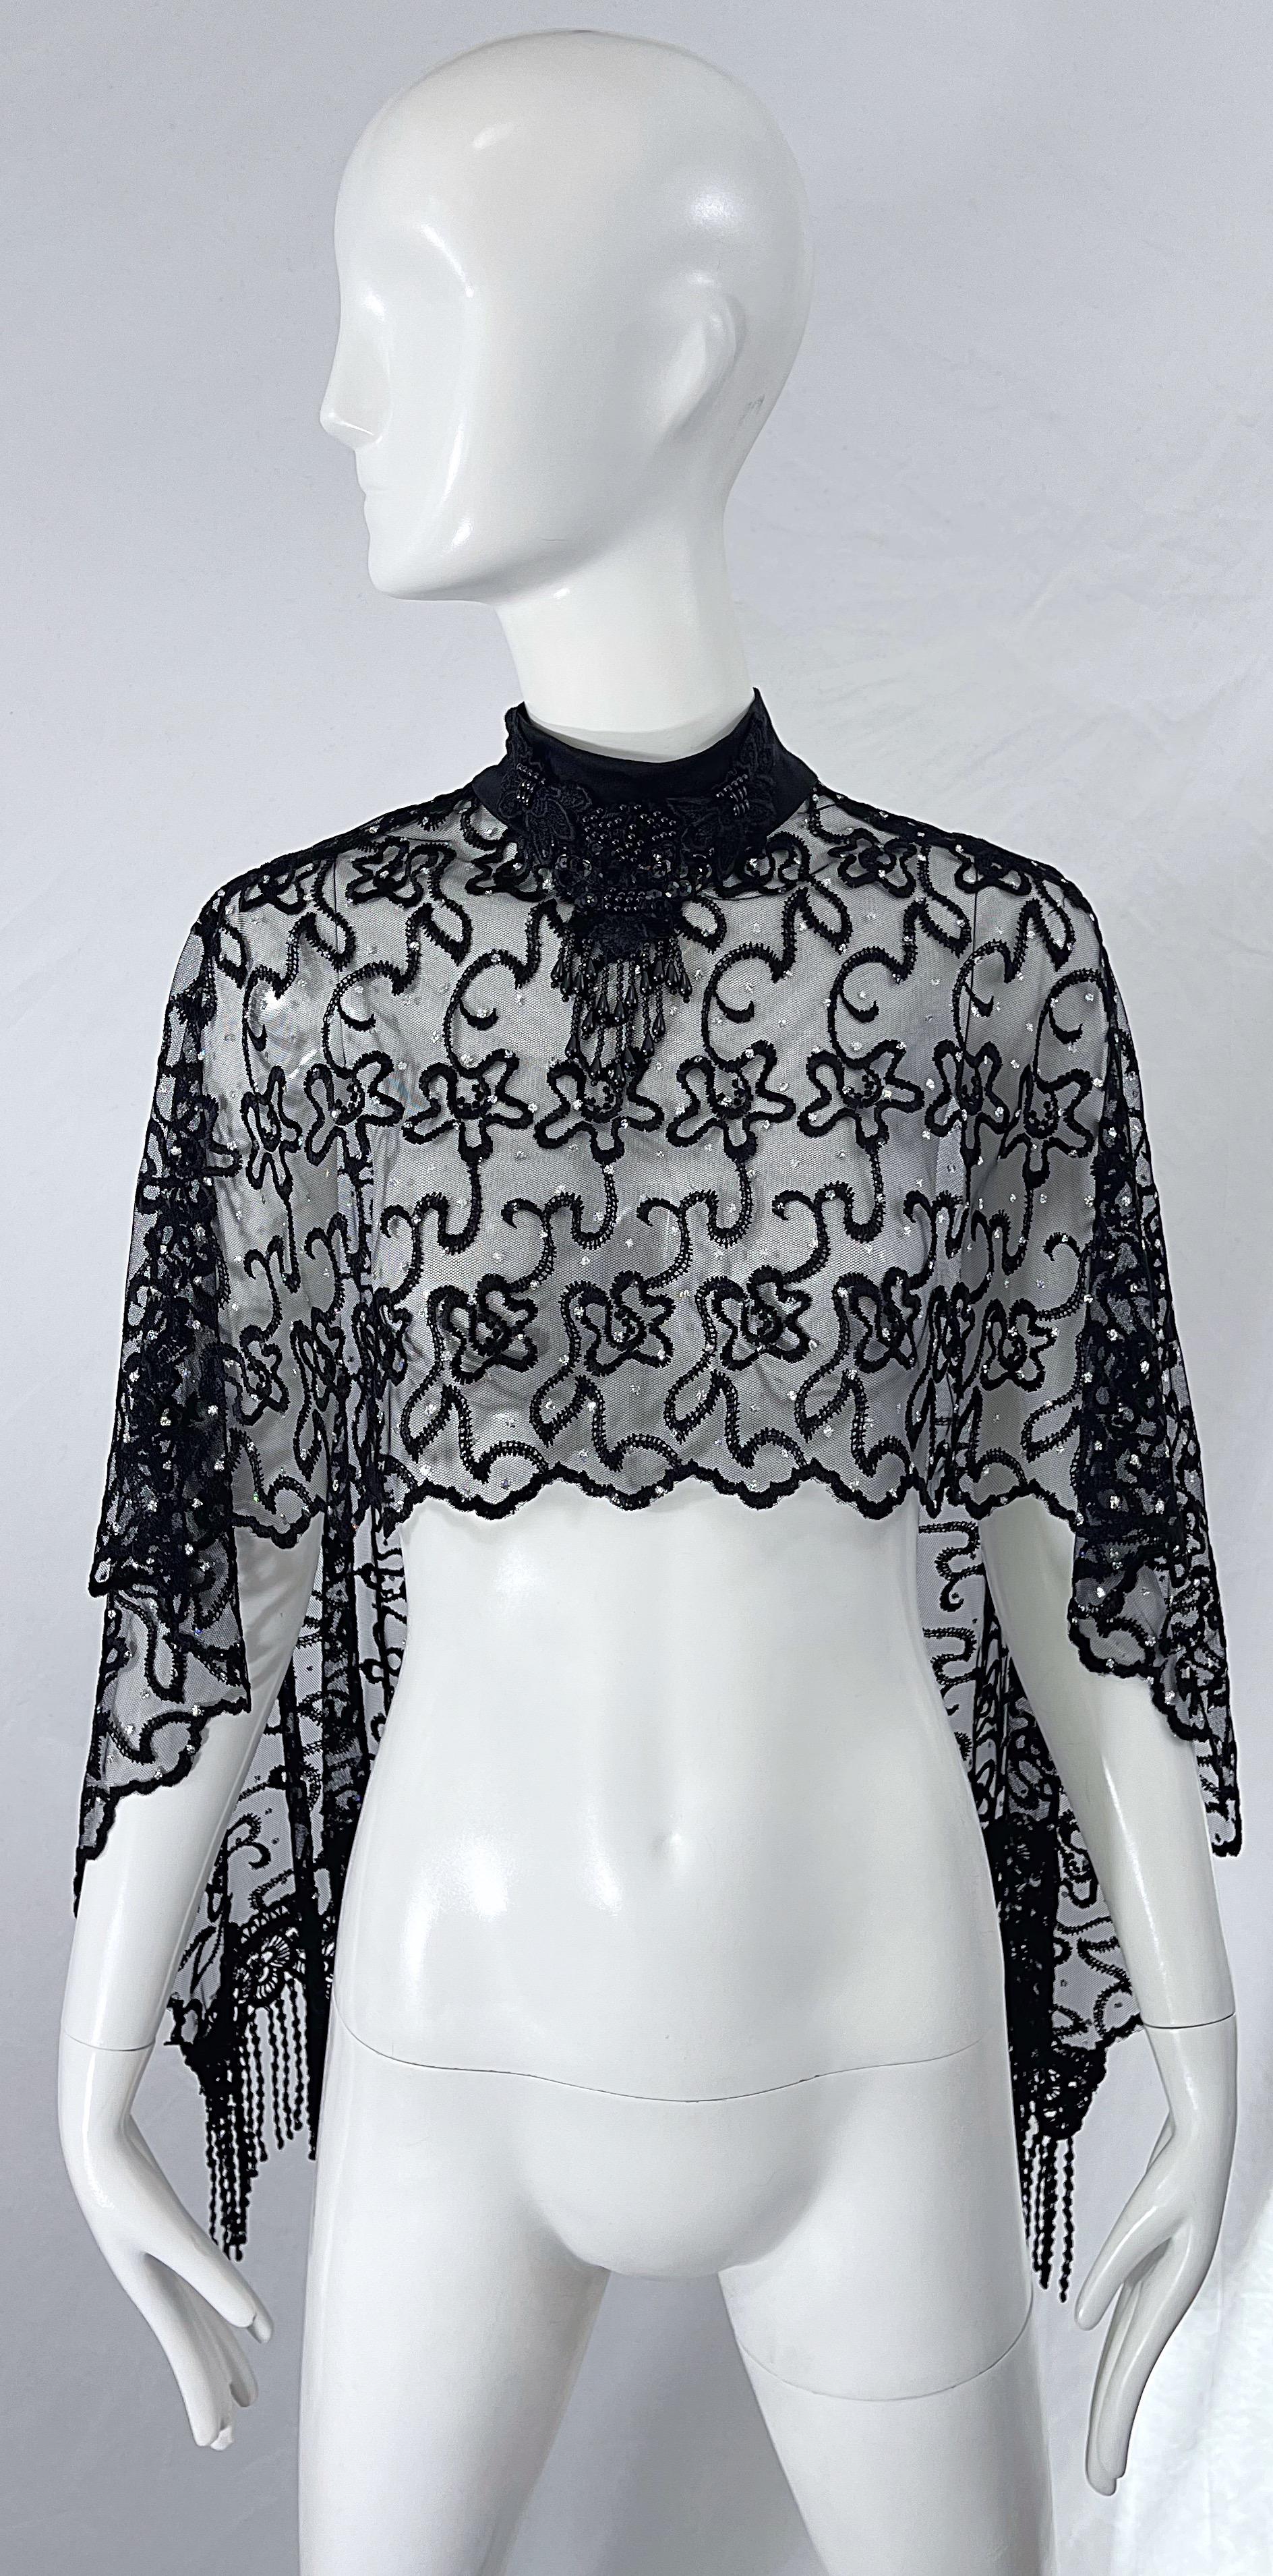 Collectible mid 70s HALSTON black sheer mesh beaded and sequin dot fringe large disco poncho cape shawl ! I can only imagine this rare beauty on the dance floor at Studio 54. Sheer black silk mesh with intricate embroidery throughout. Silver dots of